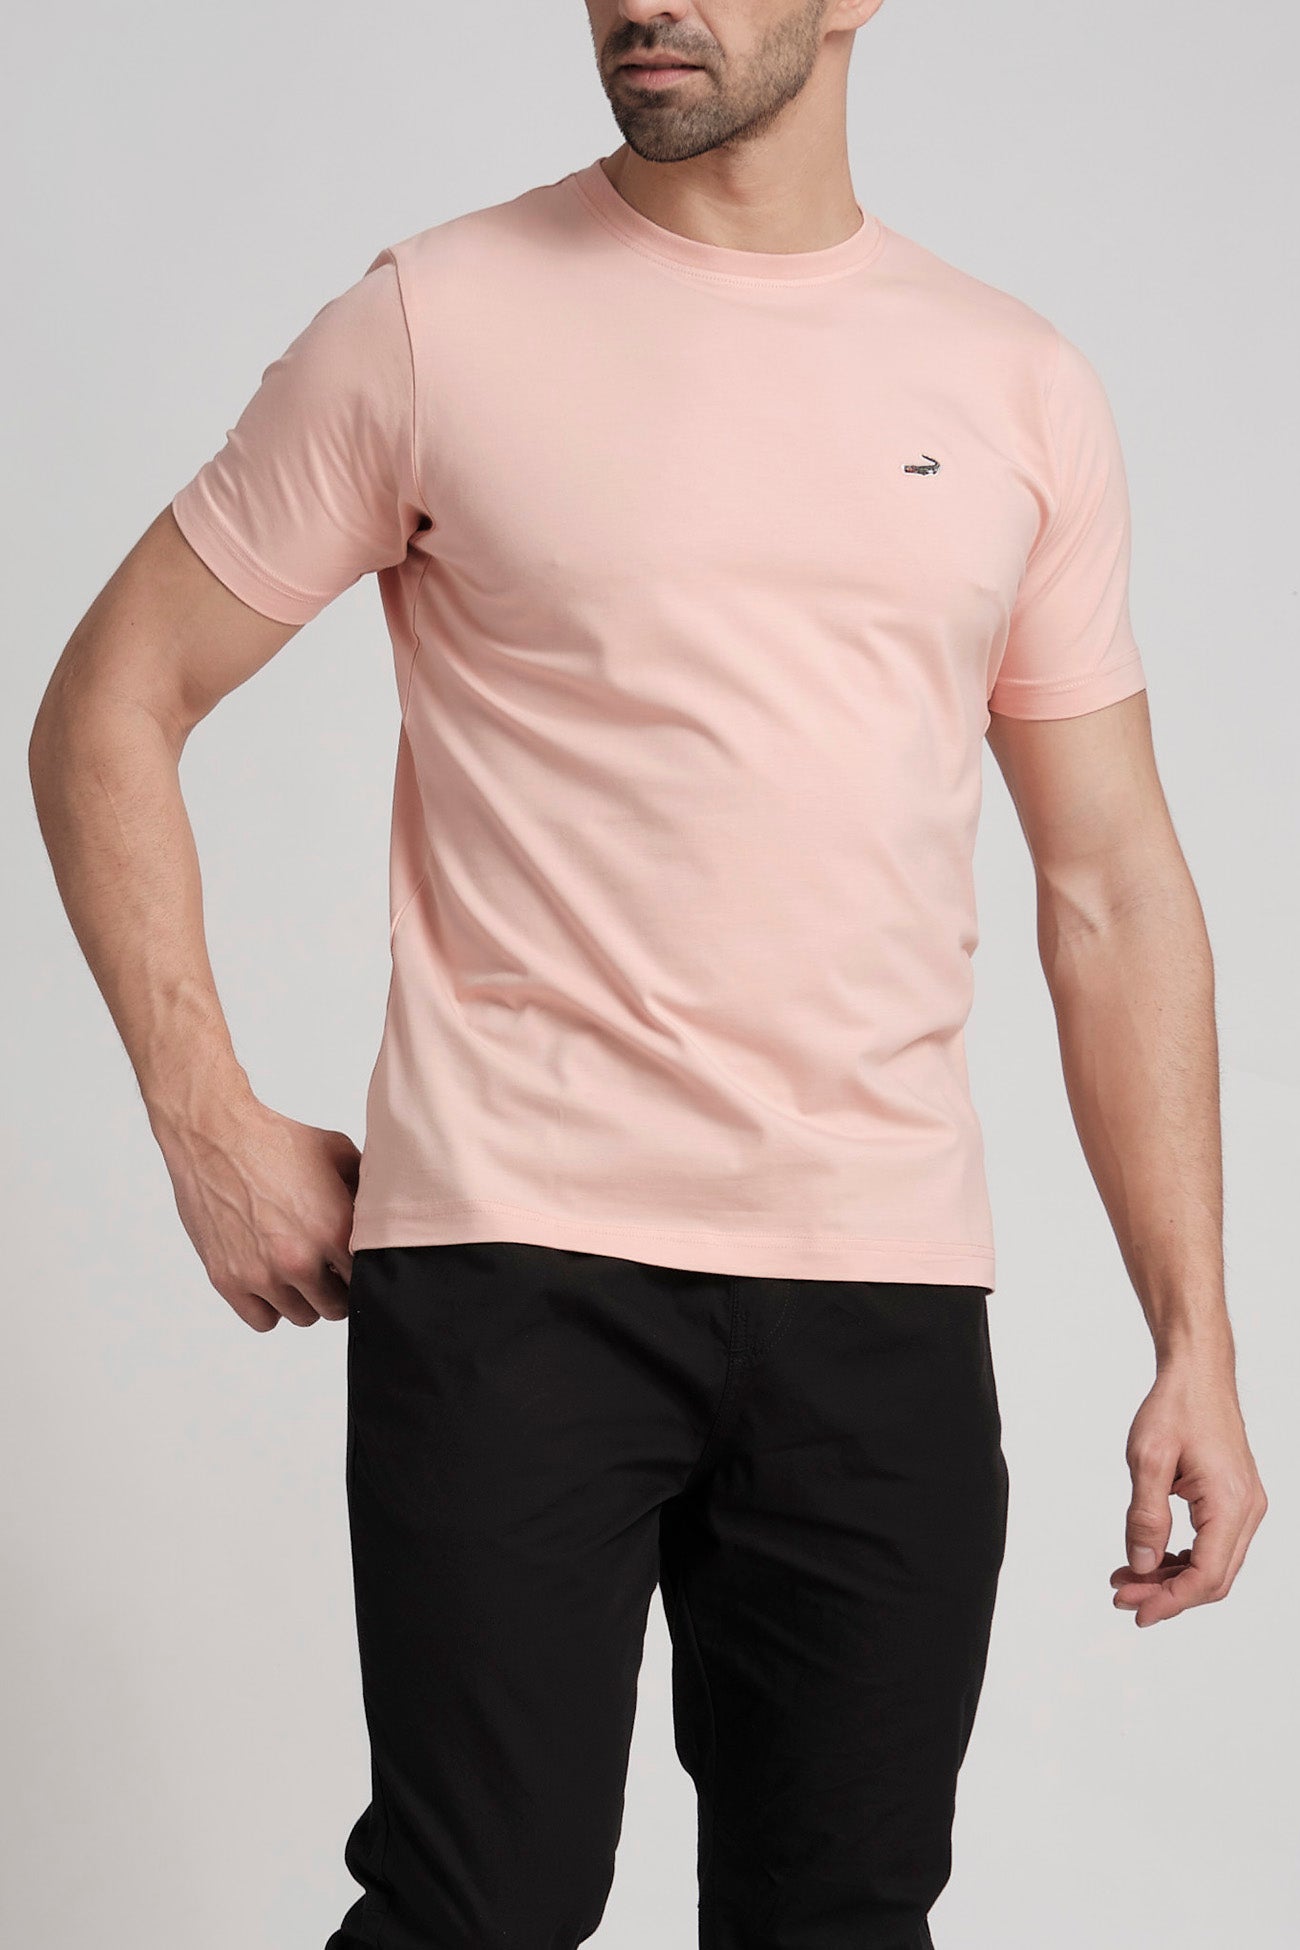 Single Jersey Verve Tee Action Fit - Peach Pearl